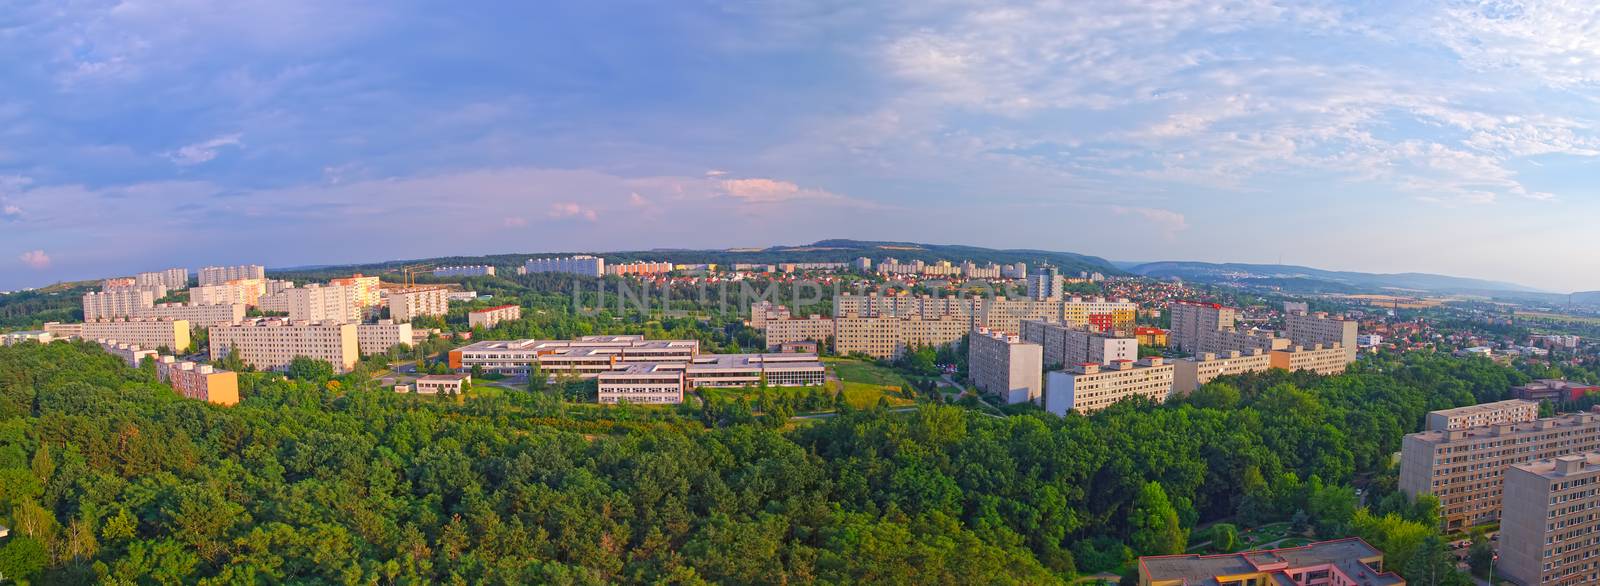 Aerial view of Prague suburb by savcoco